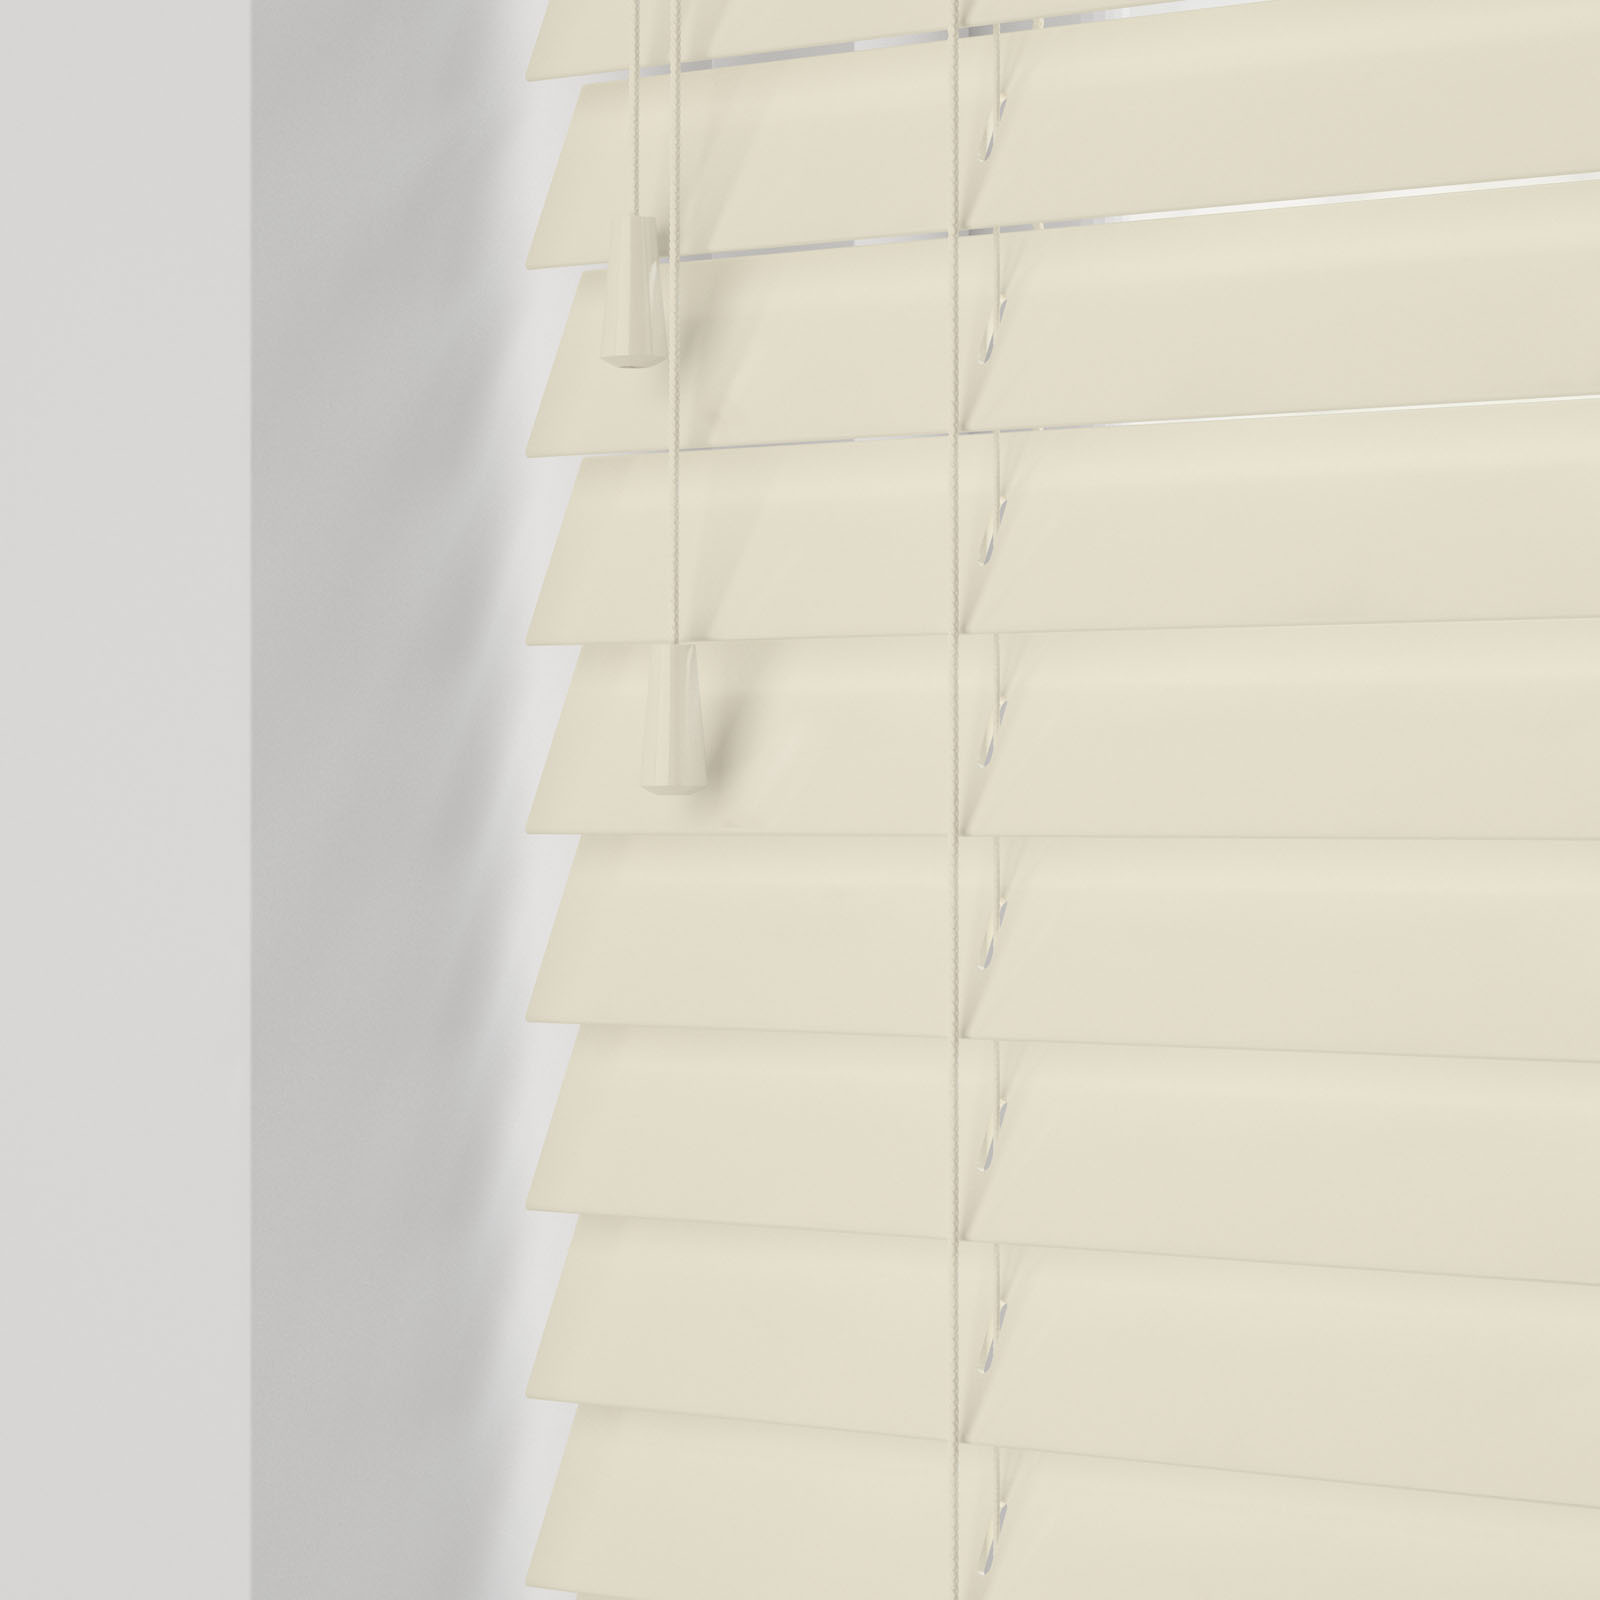 Suppliers of Venetian Blinds With Cord Or Tape Options